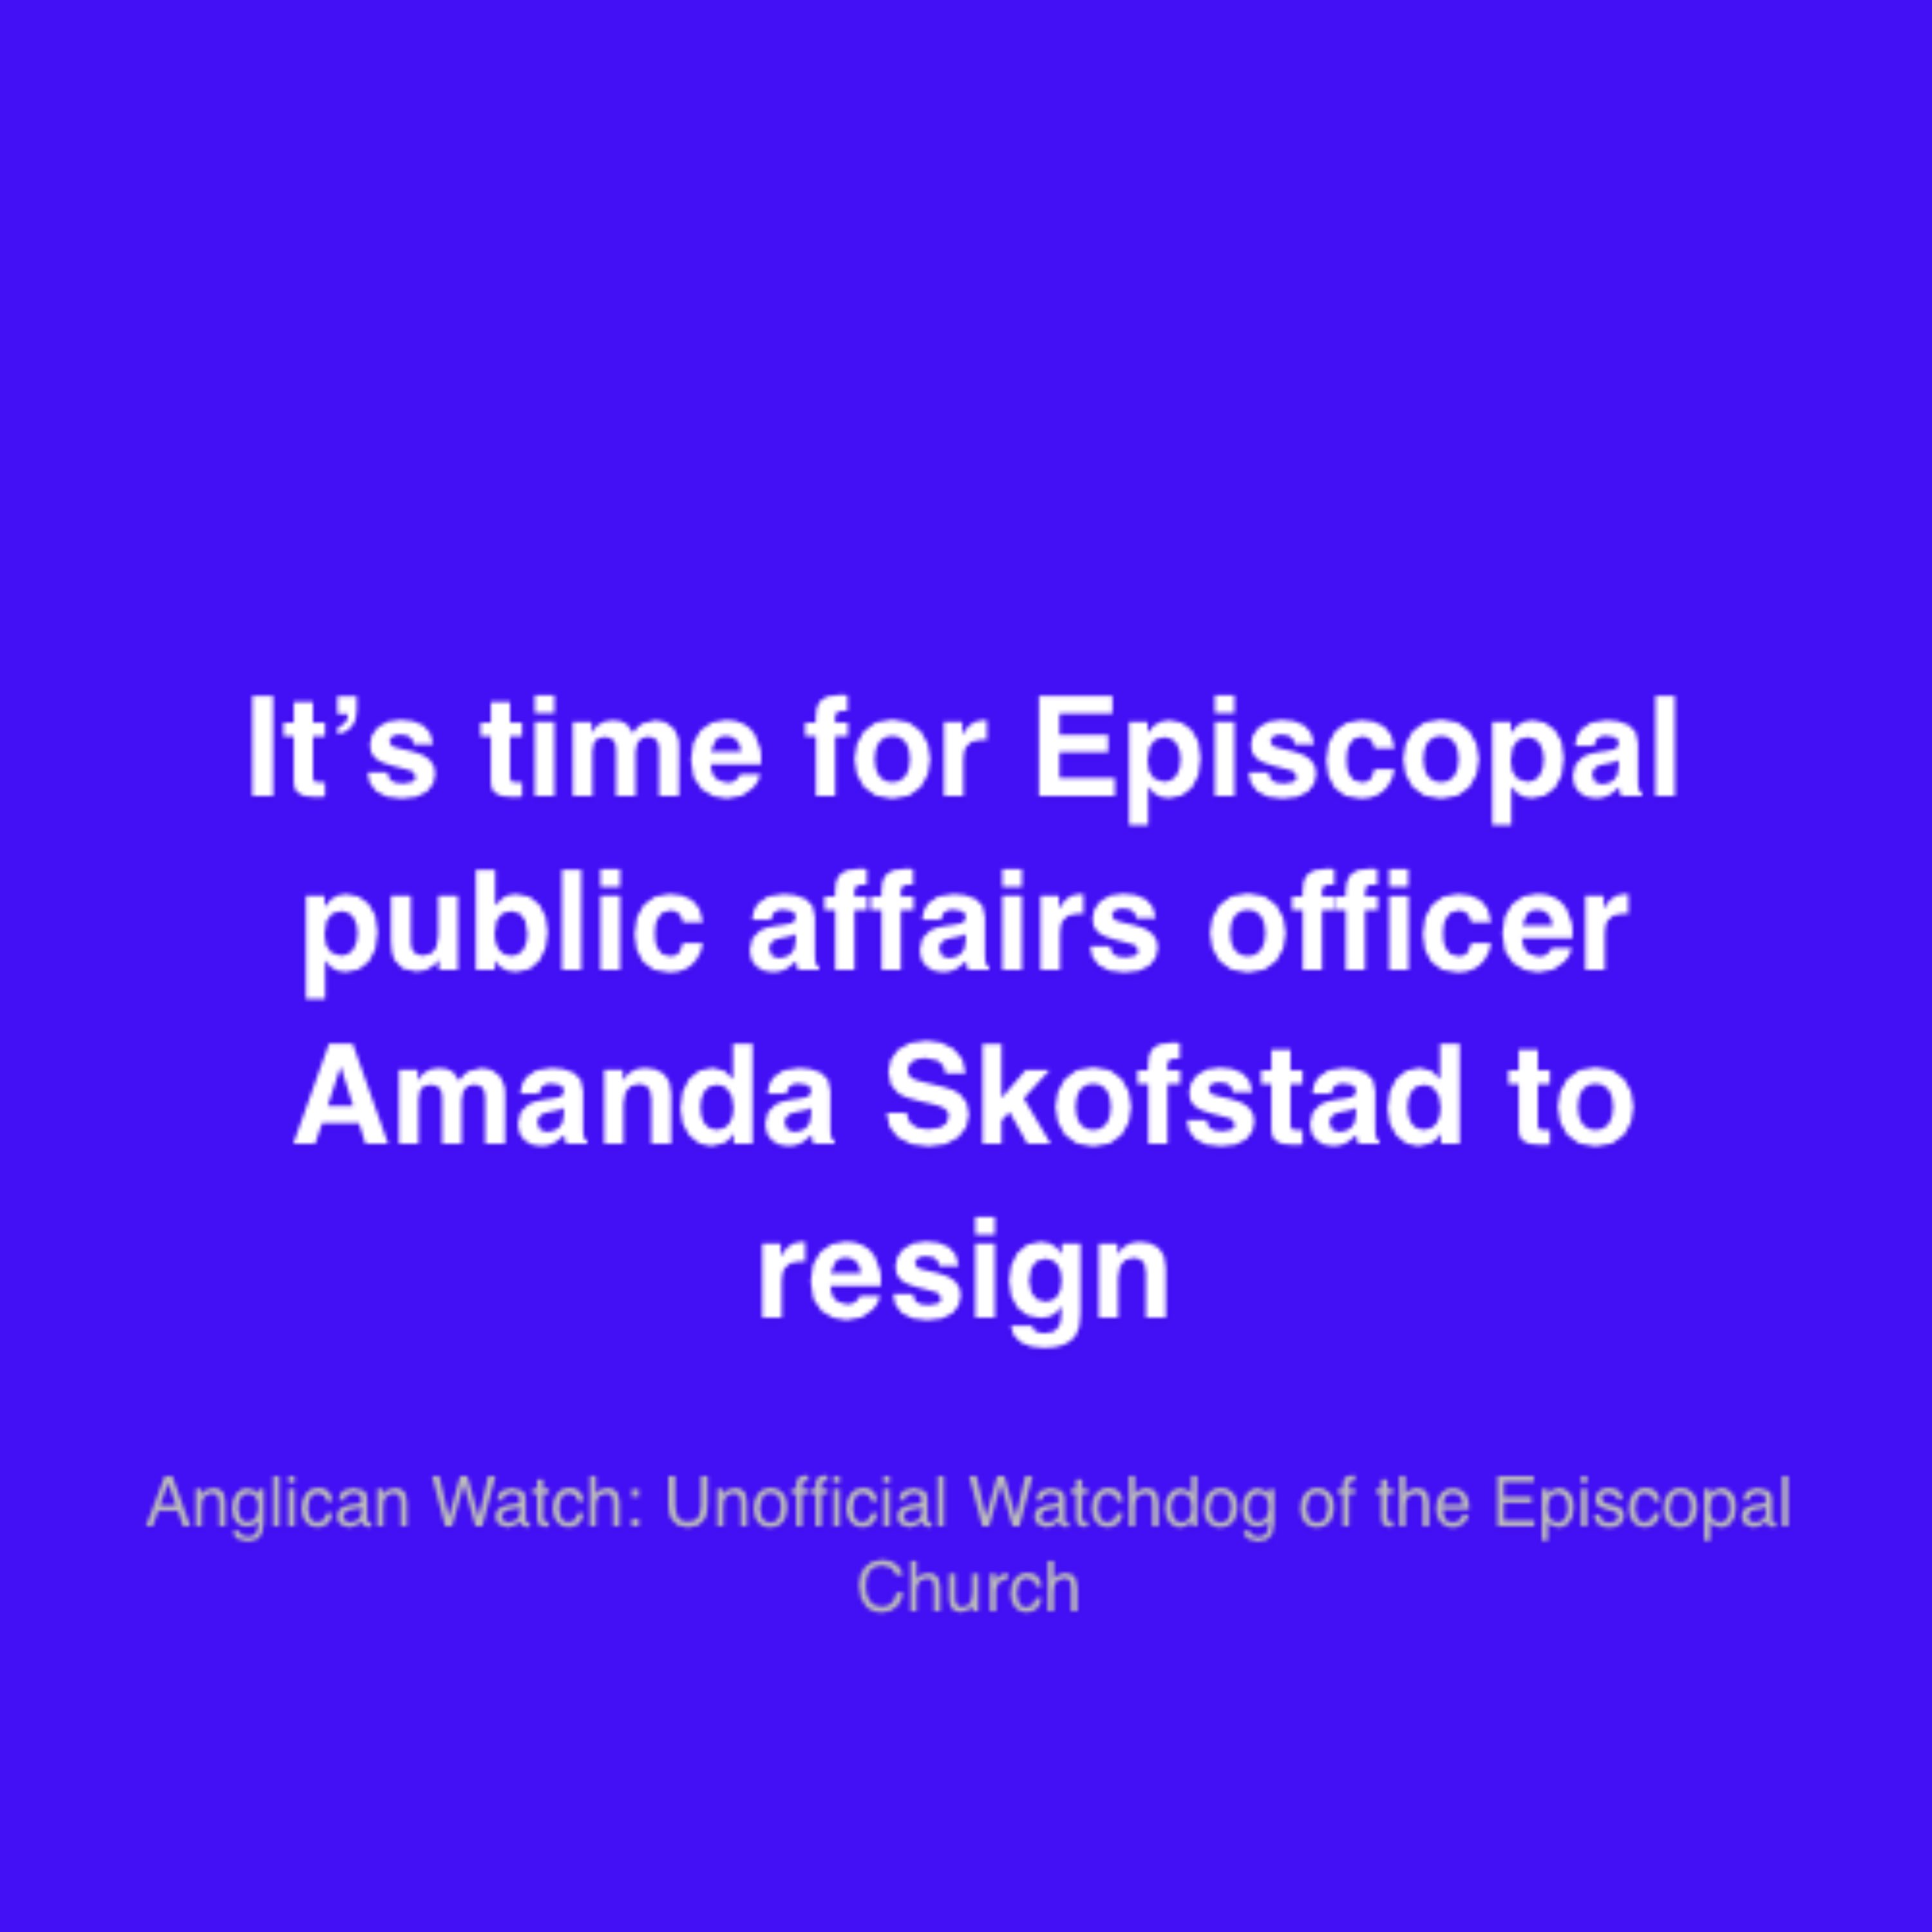 It’s time for Episcopal public affairs officer Amanda Skofstad to resign